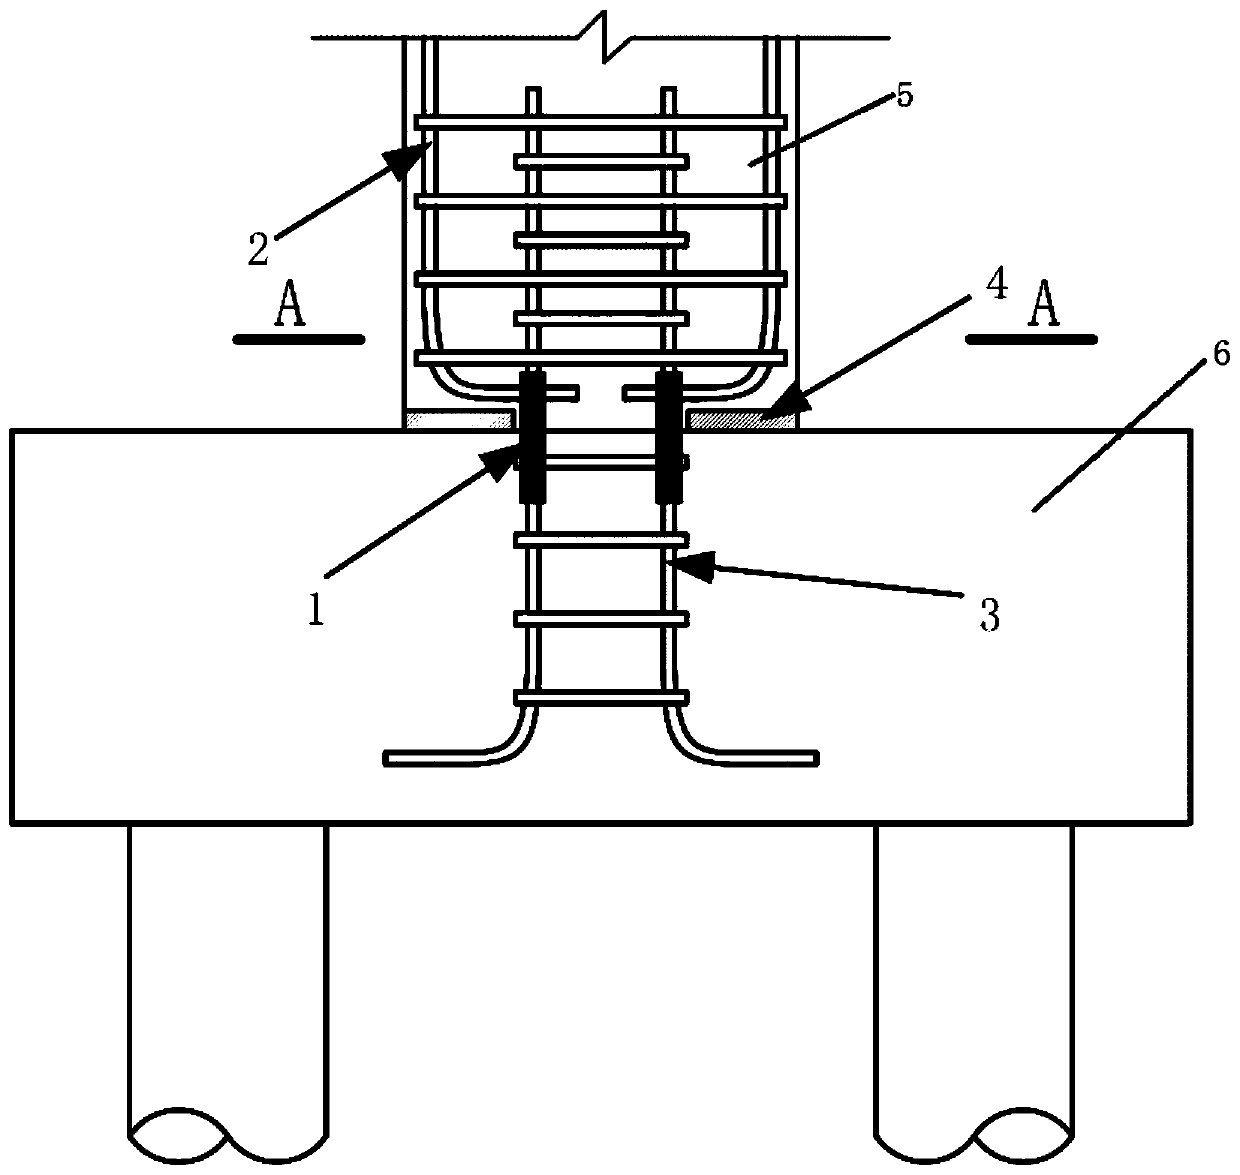 Semi-hinged structure suitable for reducing force on pier, bearing platform and foundation under action of earthquake